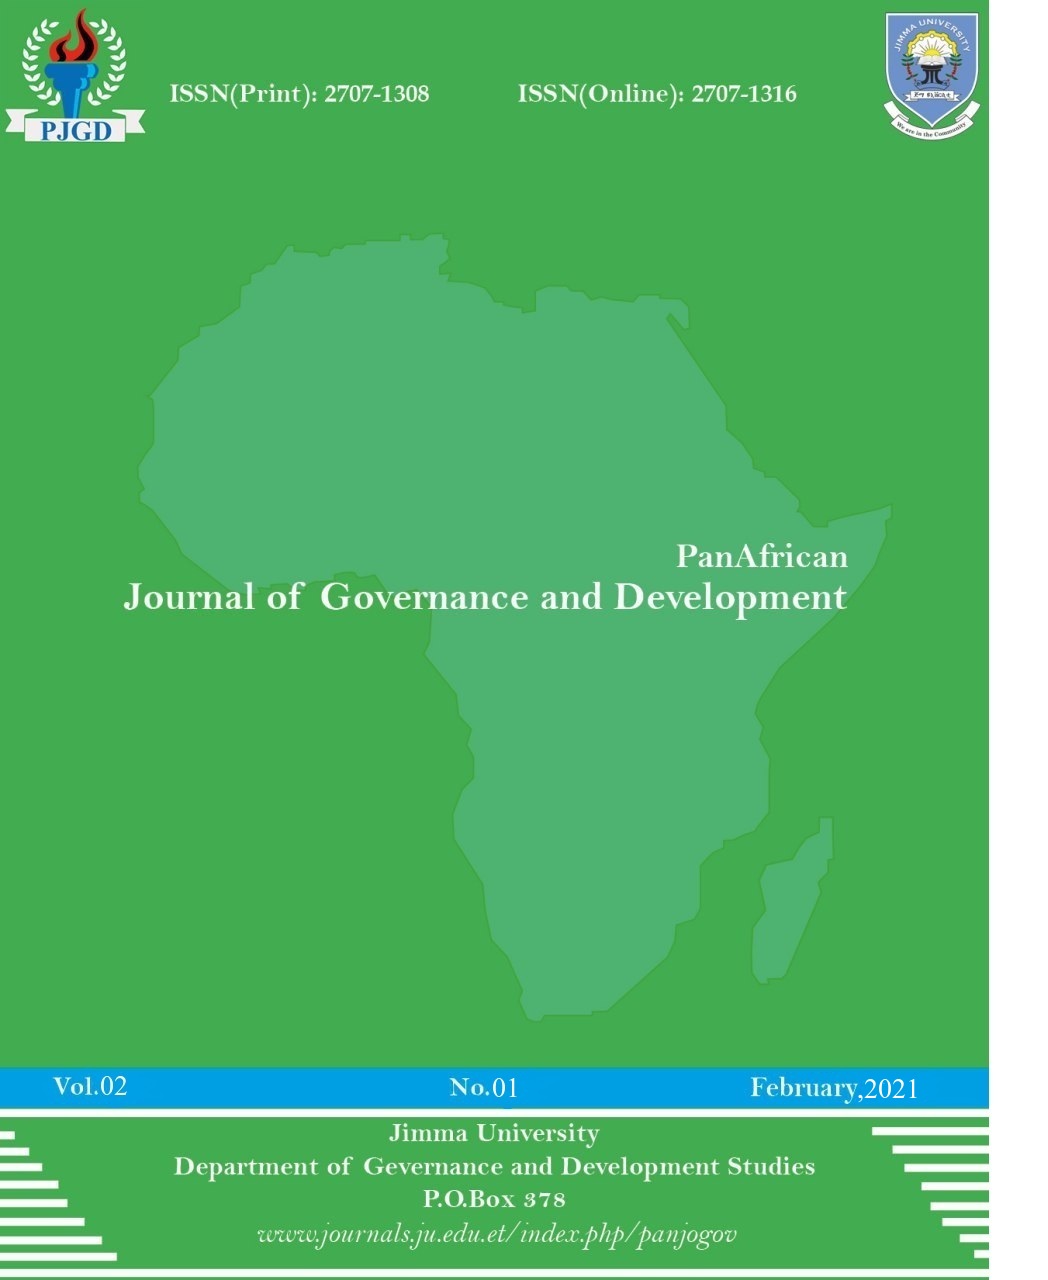 PanAfrican Journal of Governance and Development (PJGD) - Cover Page